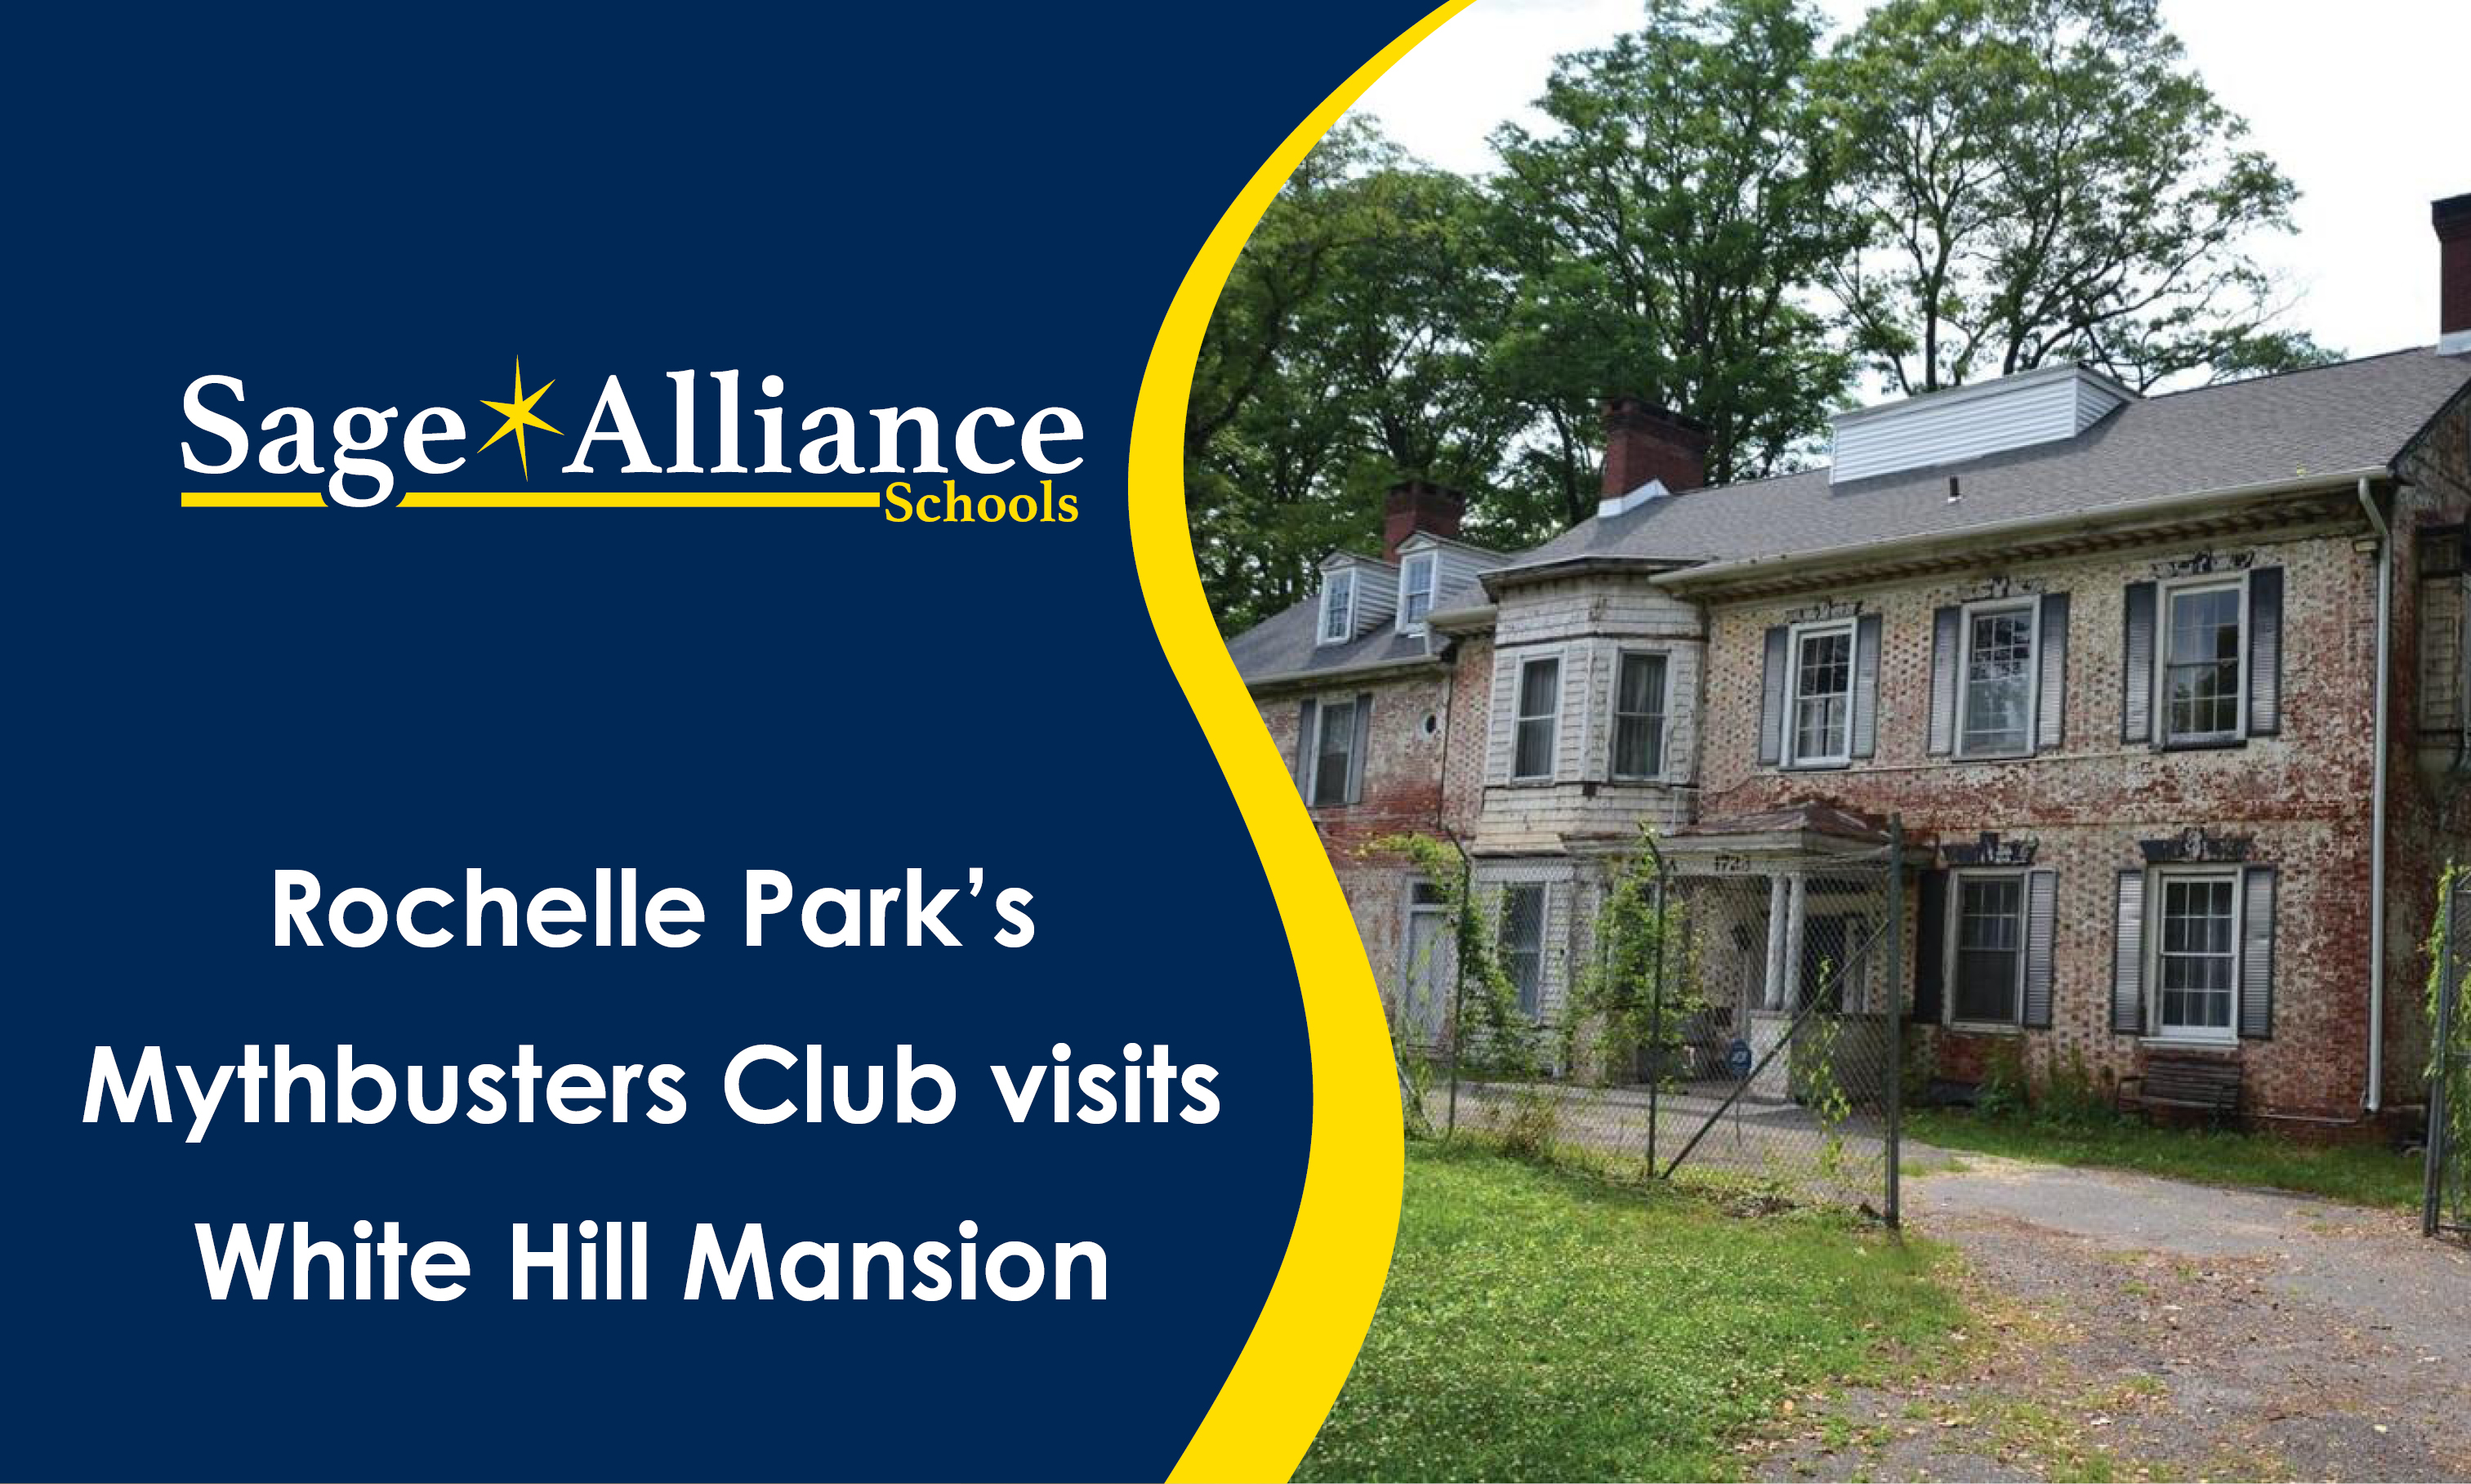 Rochelle Park's Mythbusters Club visits White Hill Mansion